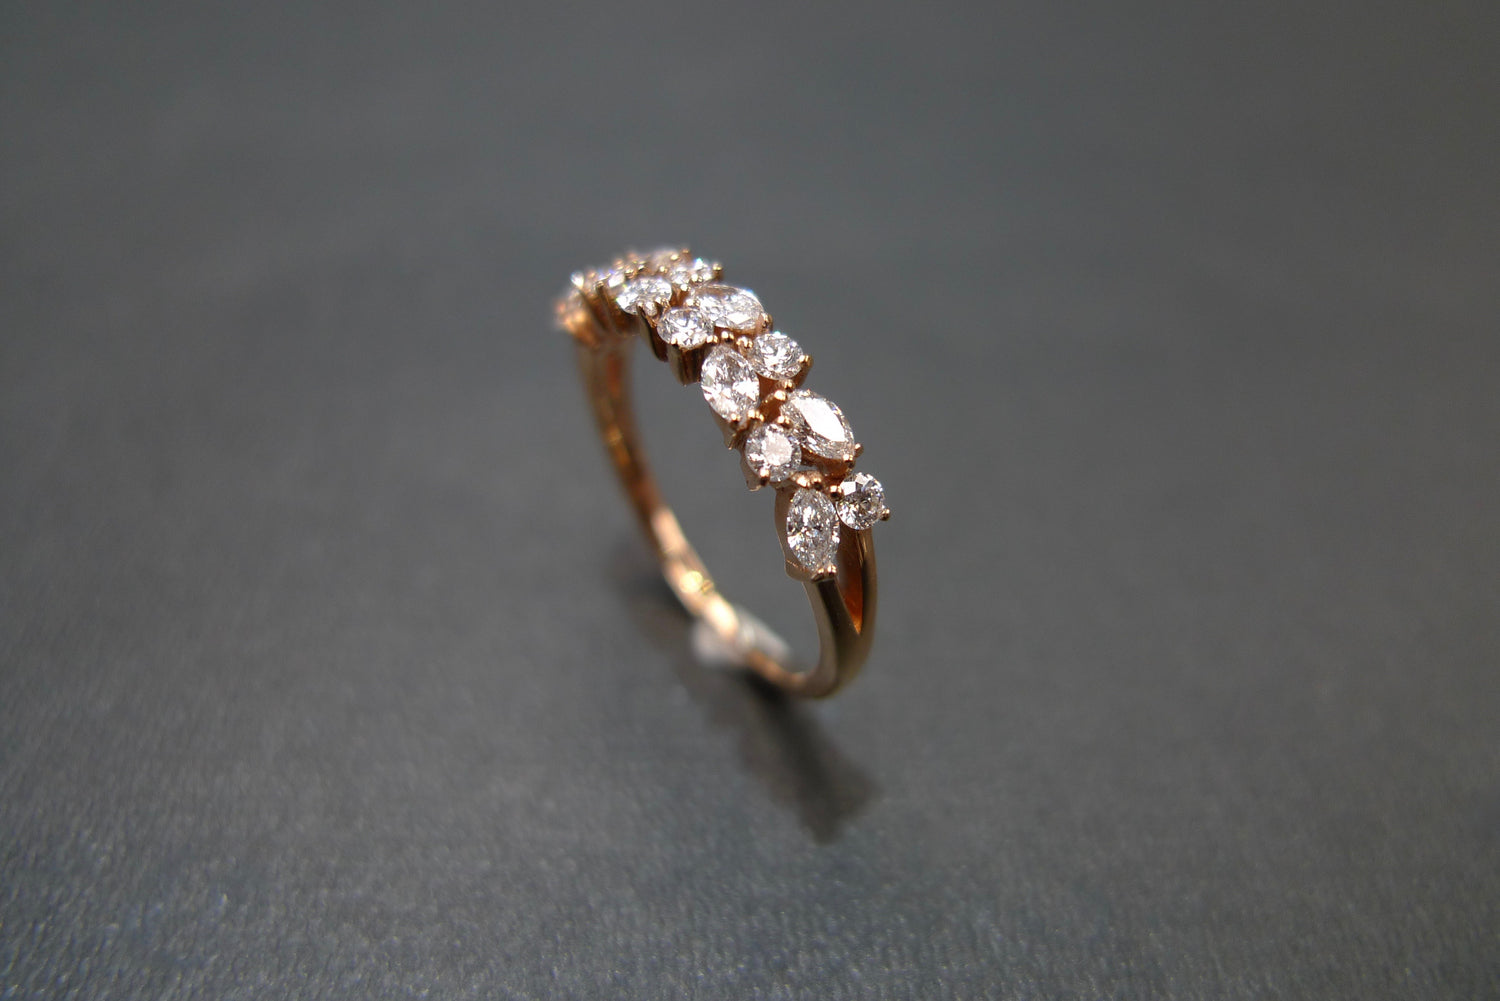 4mm Marquise Diamond Wedding Ring in 18K Rose Gold - HN JEWELRY